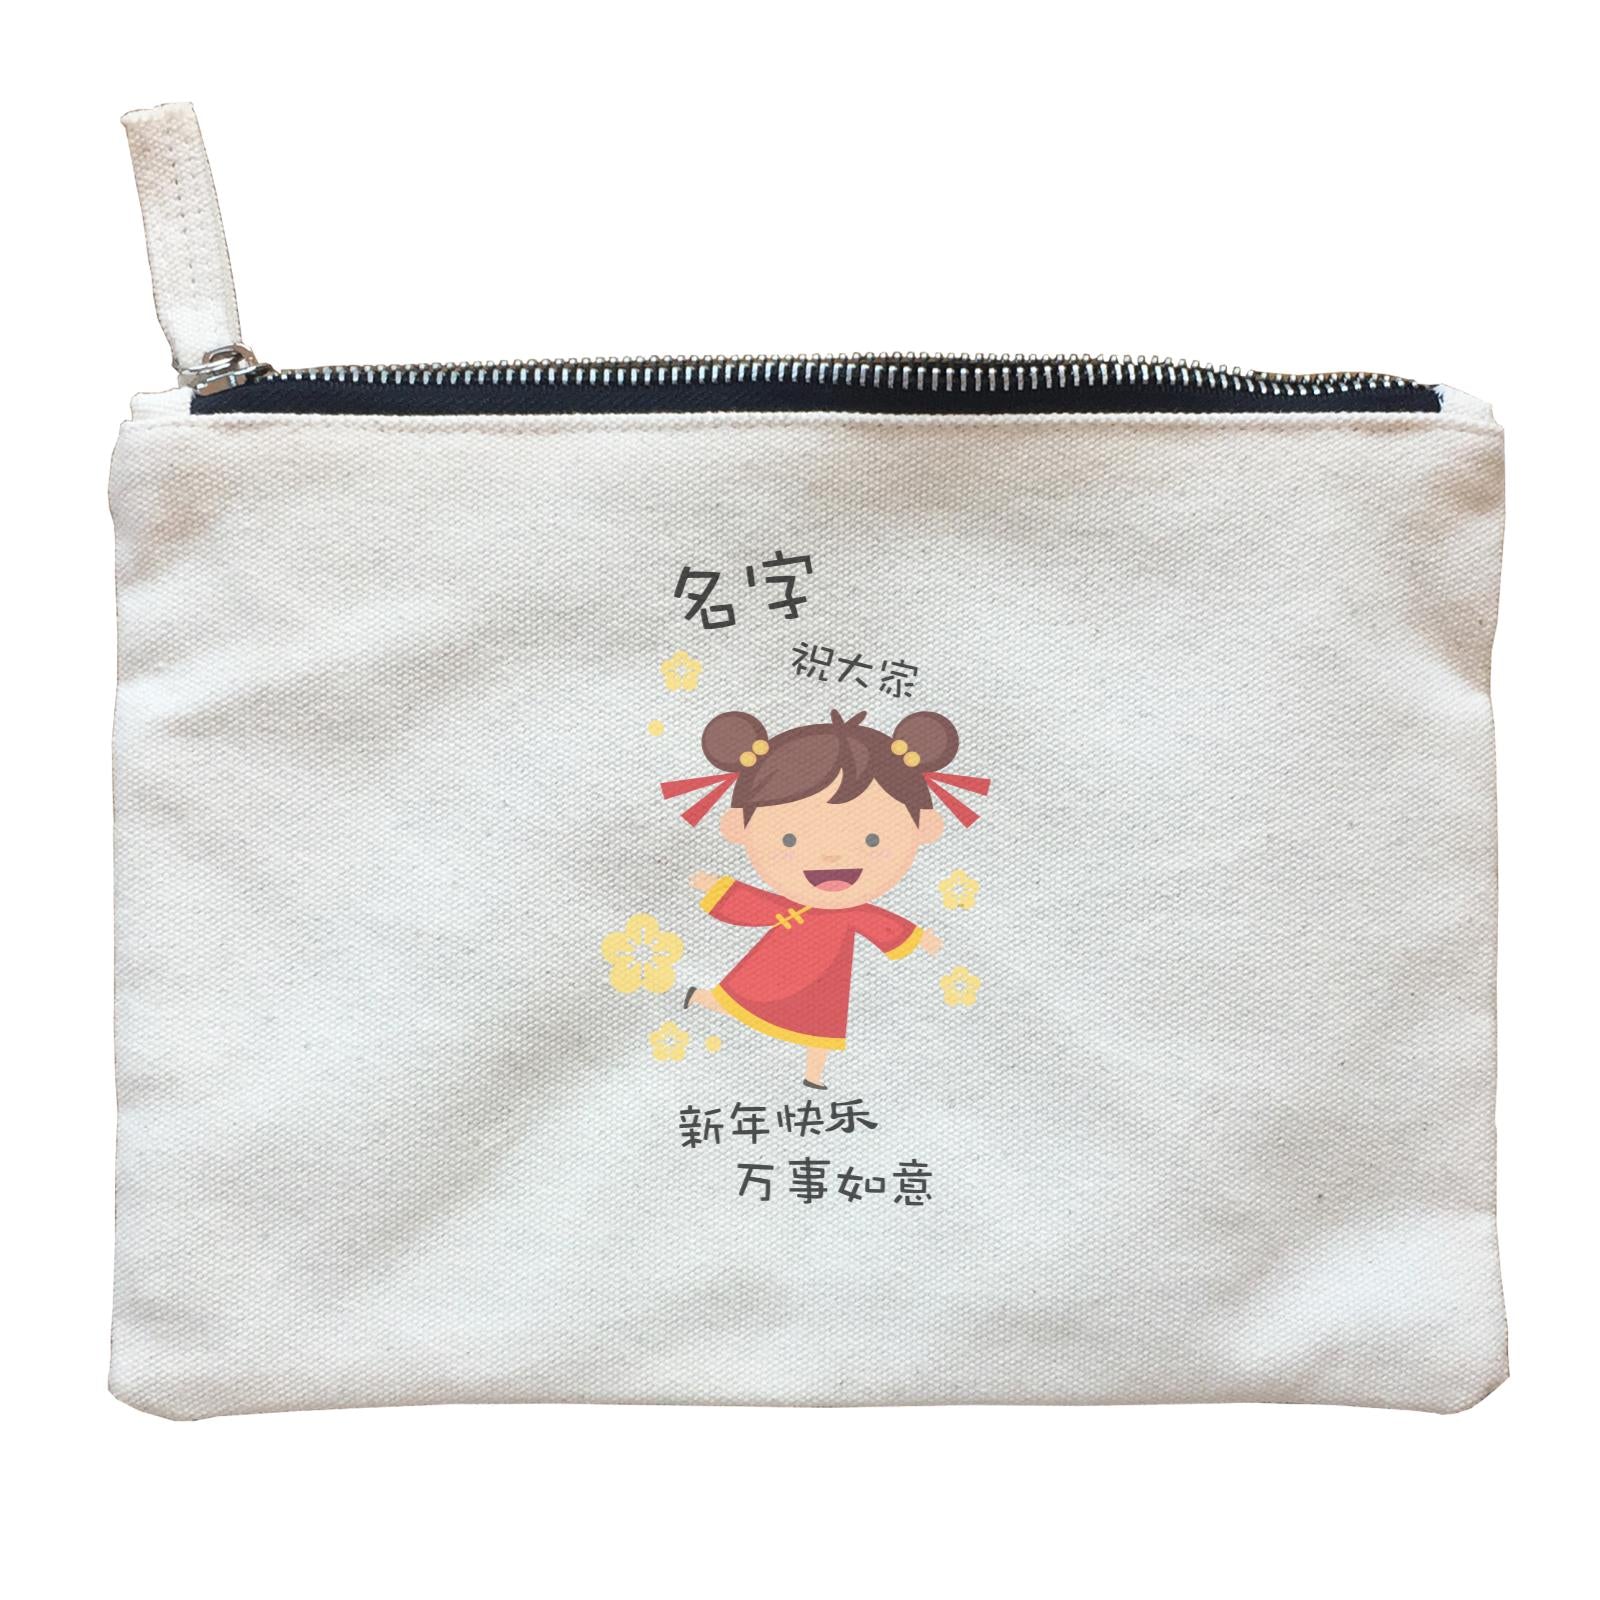 Chinese New Year Cute Girl 2 Wishes Everyone Happy CNY Zipper Pouch